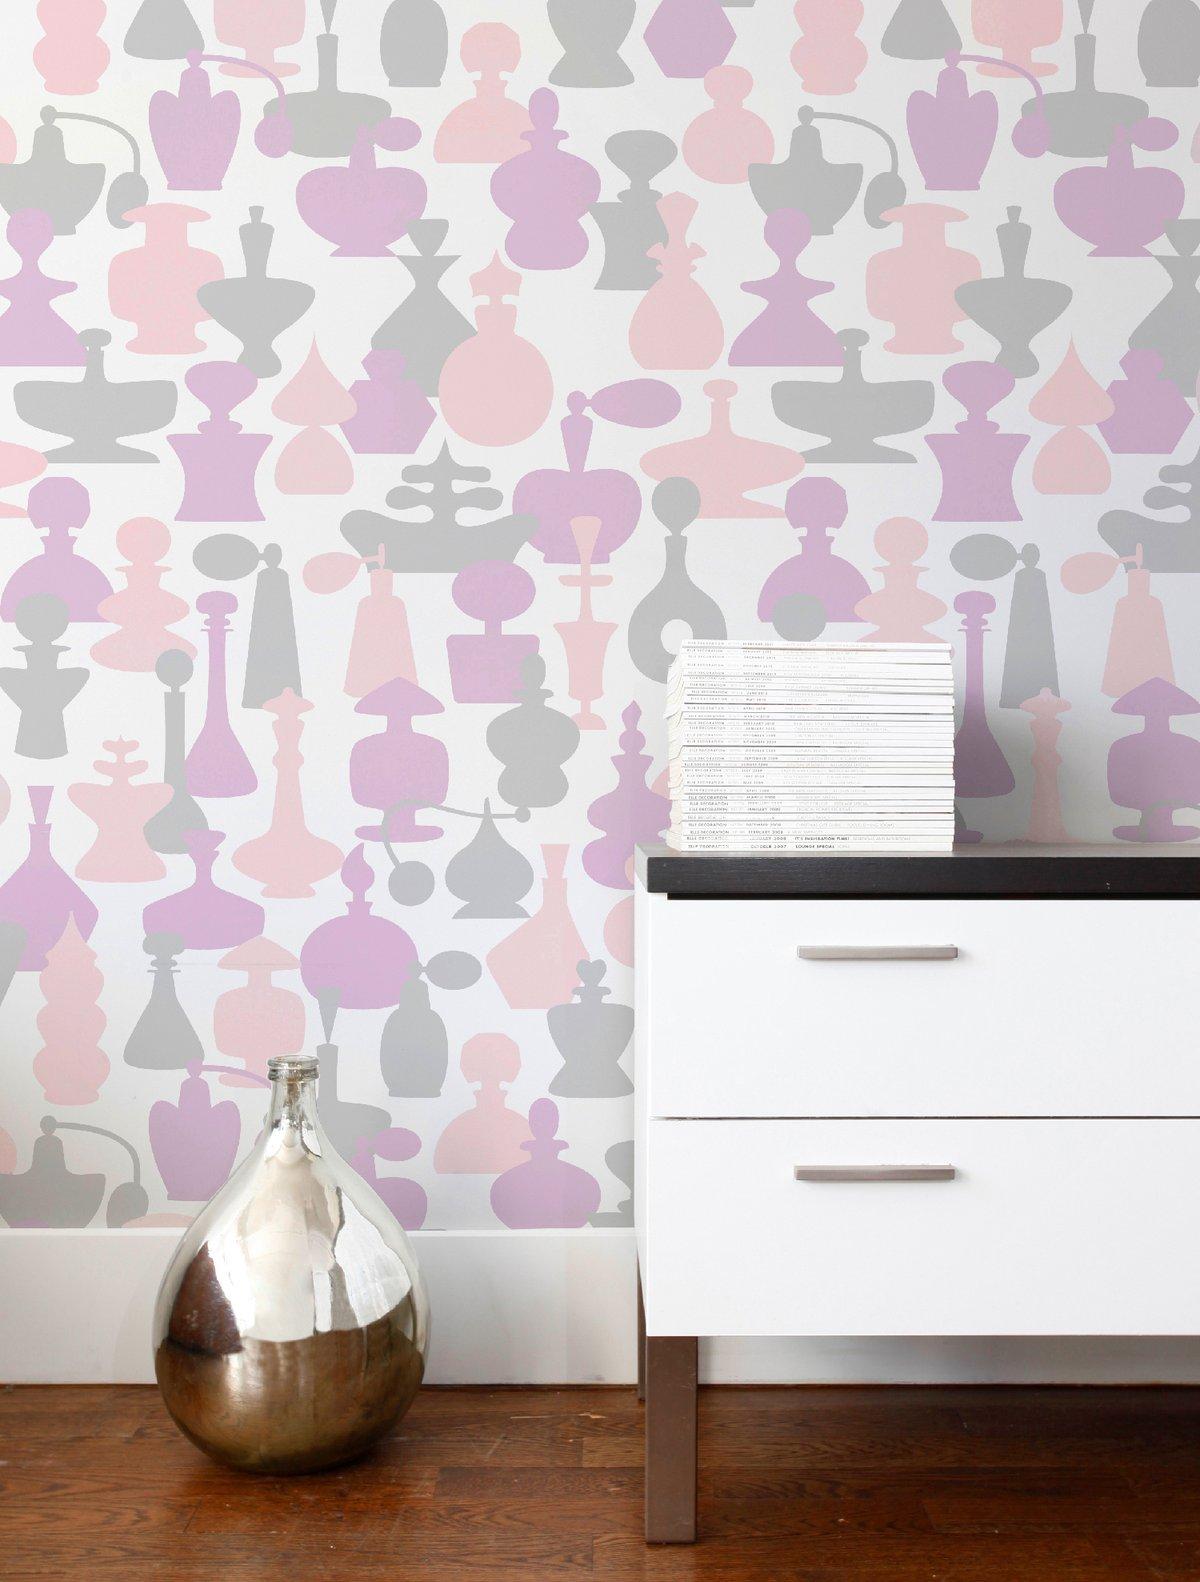 Inspired by vintage perfume bottles, this glam pattern is perfect for your powder room!

Printing: Screen-printed by hand (must be ordered in even increments). 
Material: FSC-certified paper. 
Trimming: This product may come pre-trimmed or